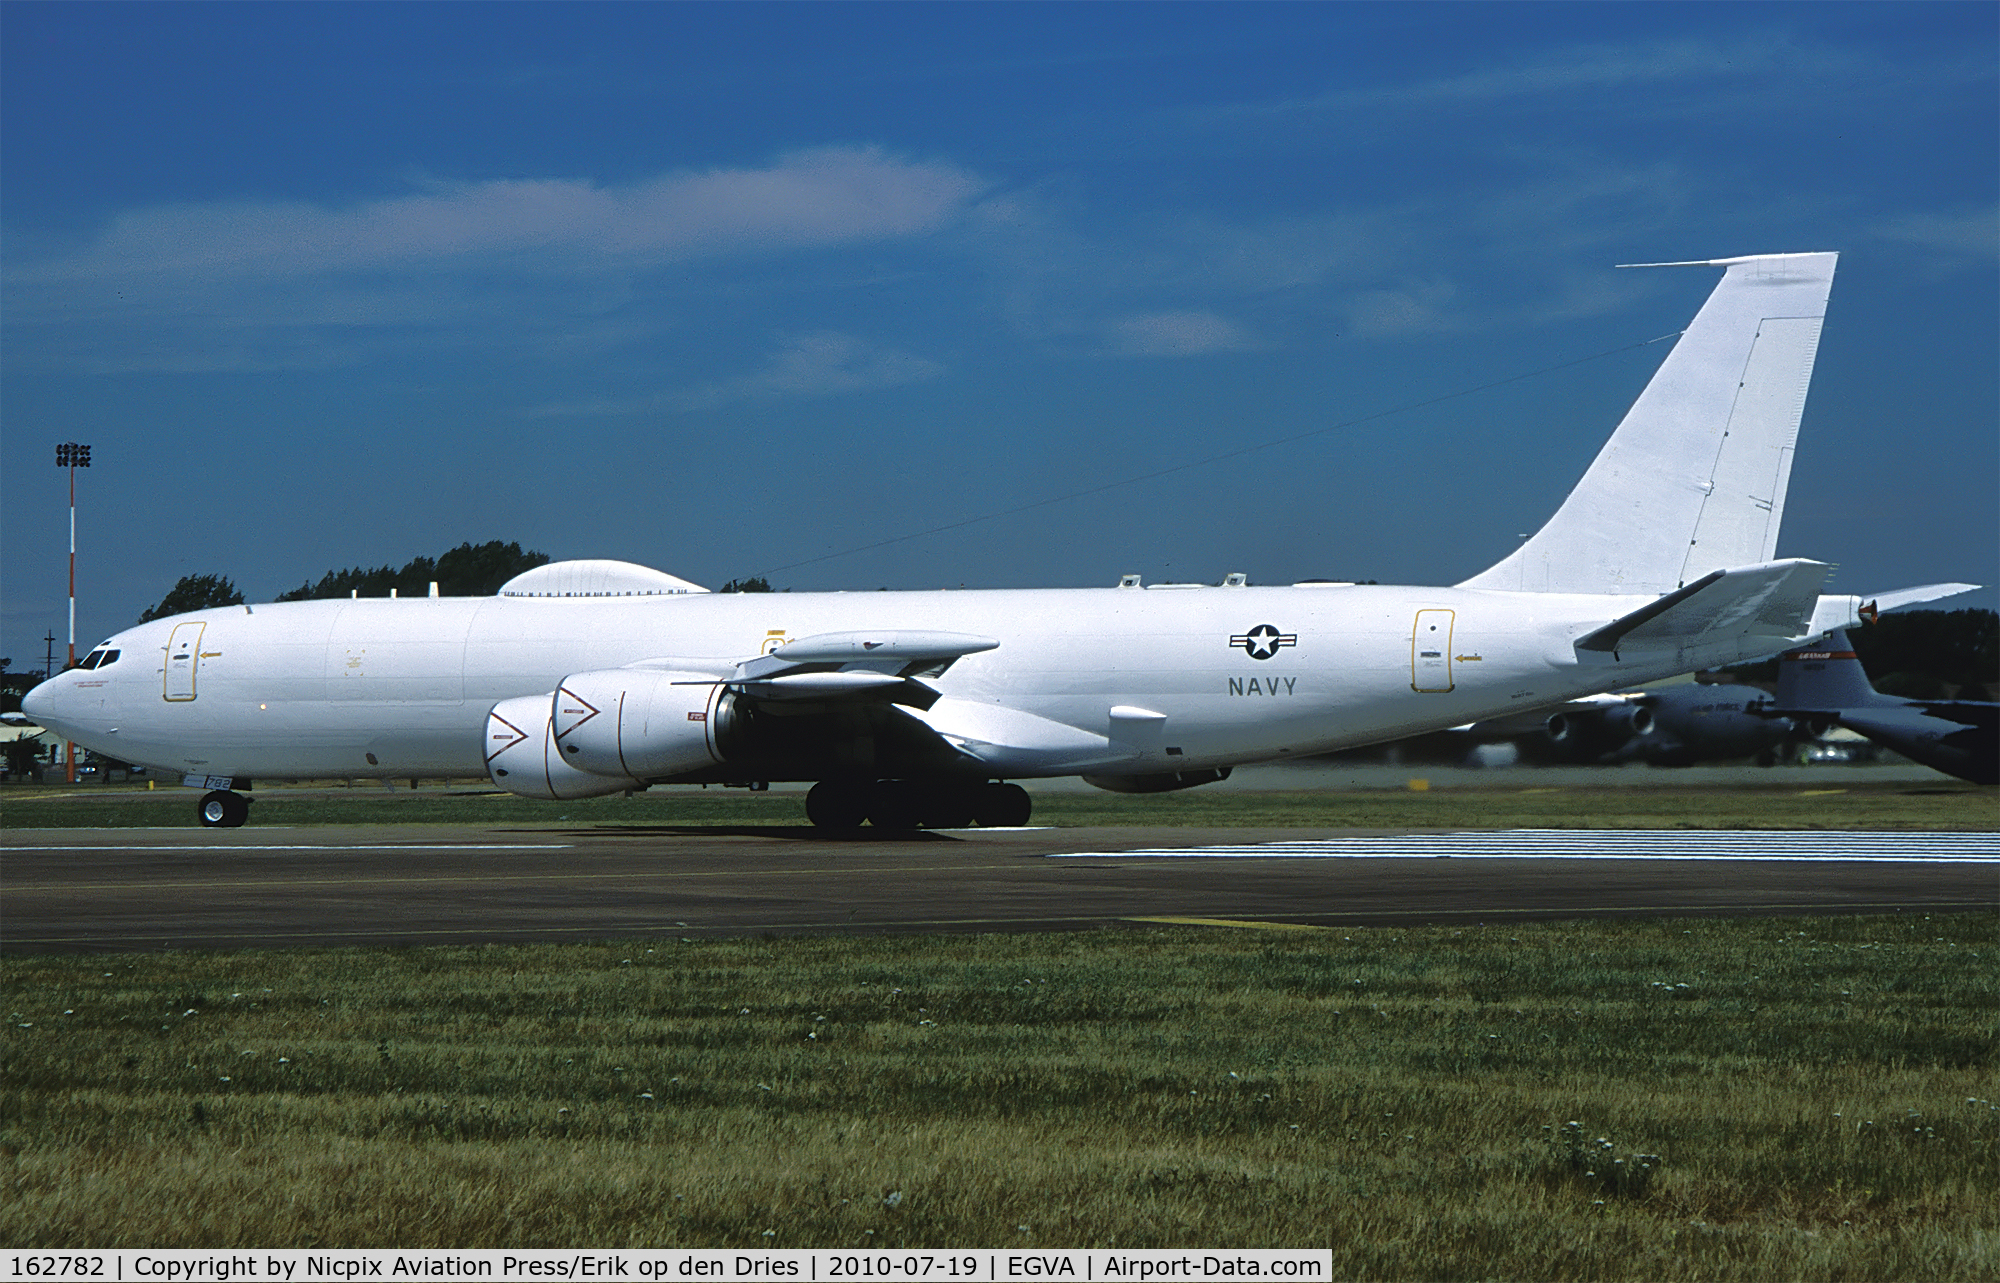 162782, 1989 Boeing E-6B Mercury C/N 23430, E-6B 162782 was one of the more rare birds to attend the RIAT-2010 at RAF Fairford.